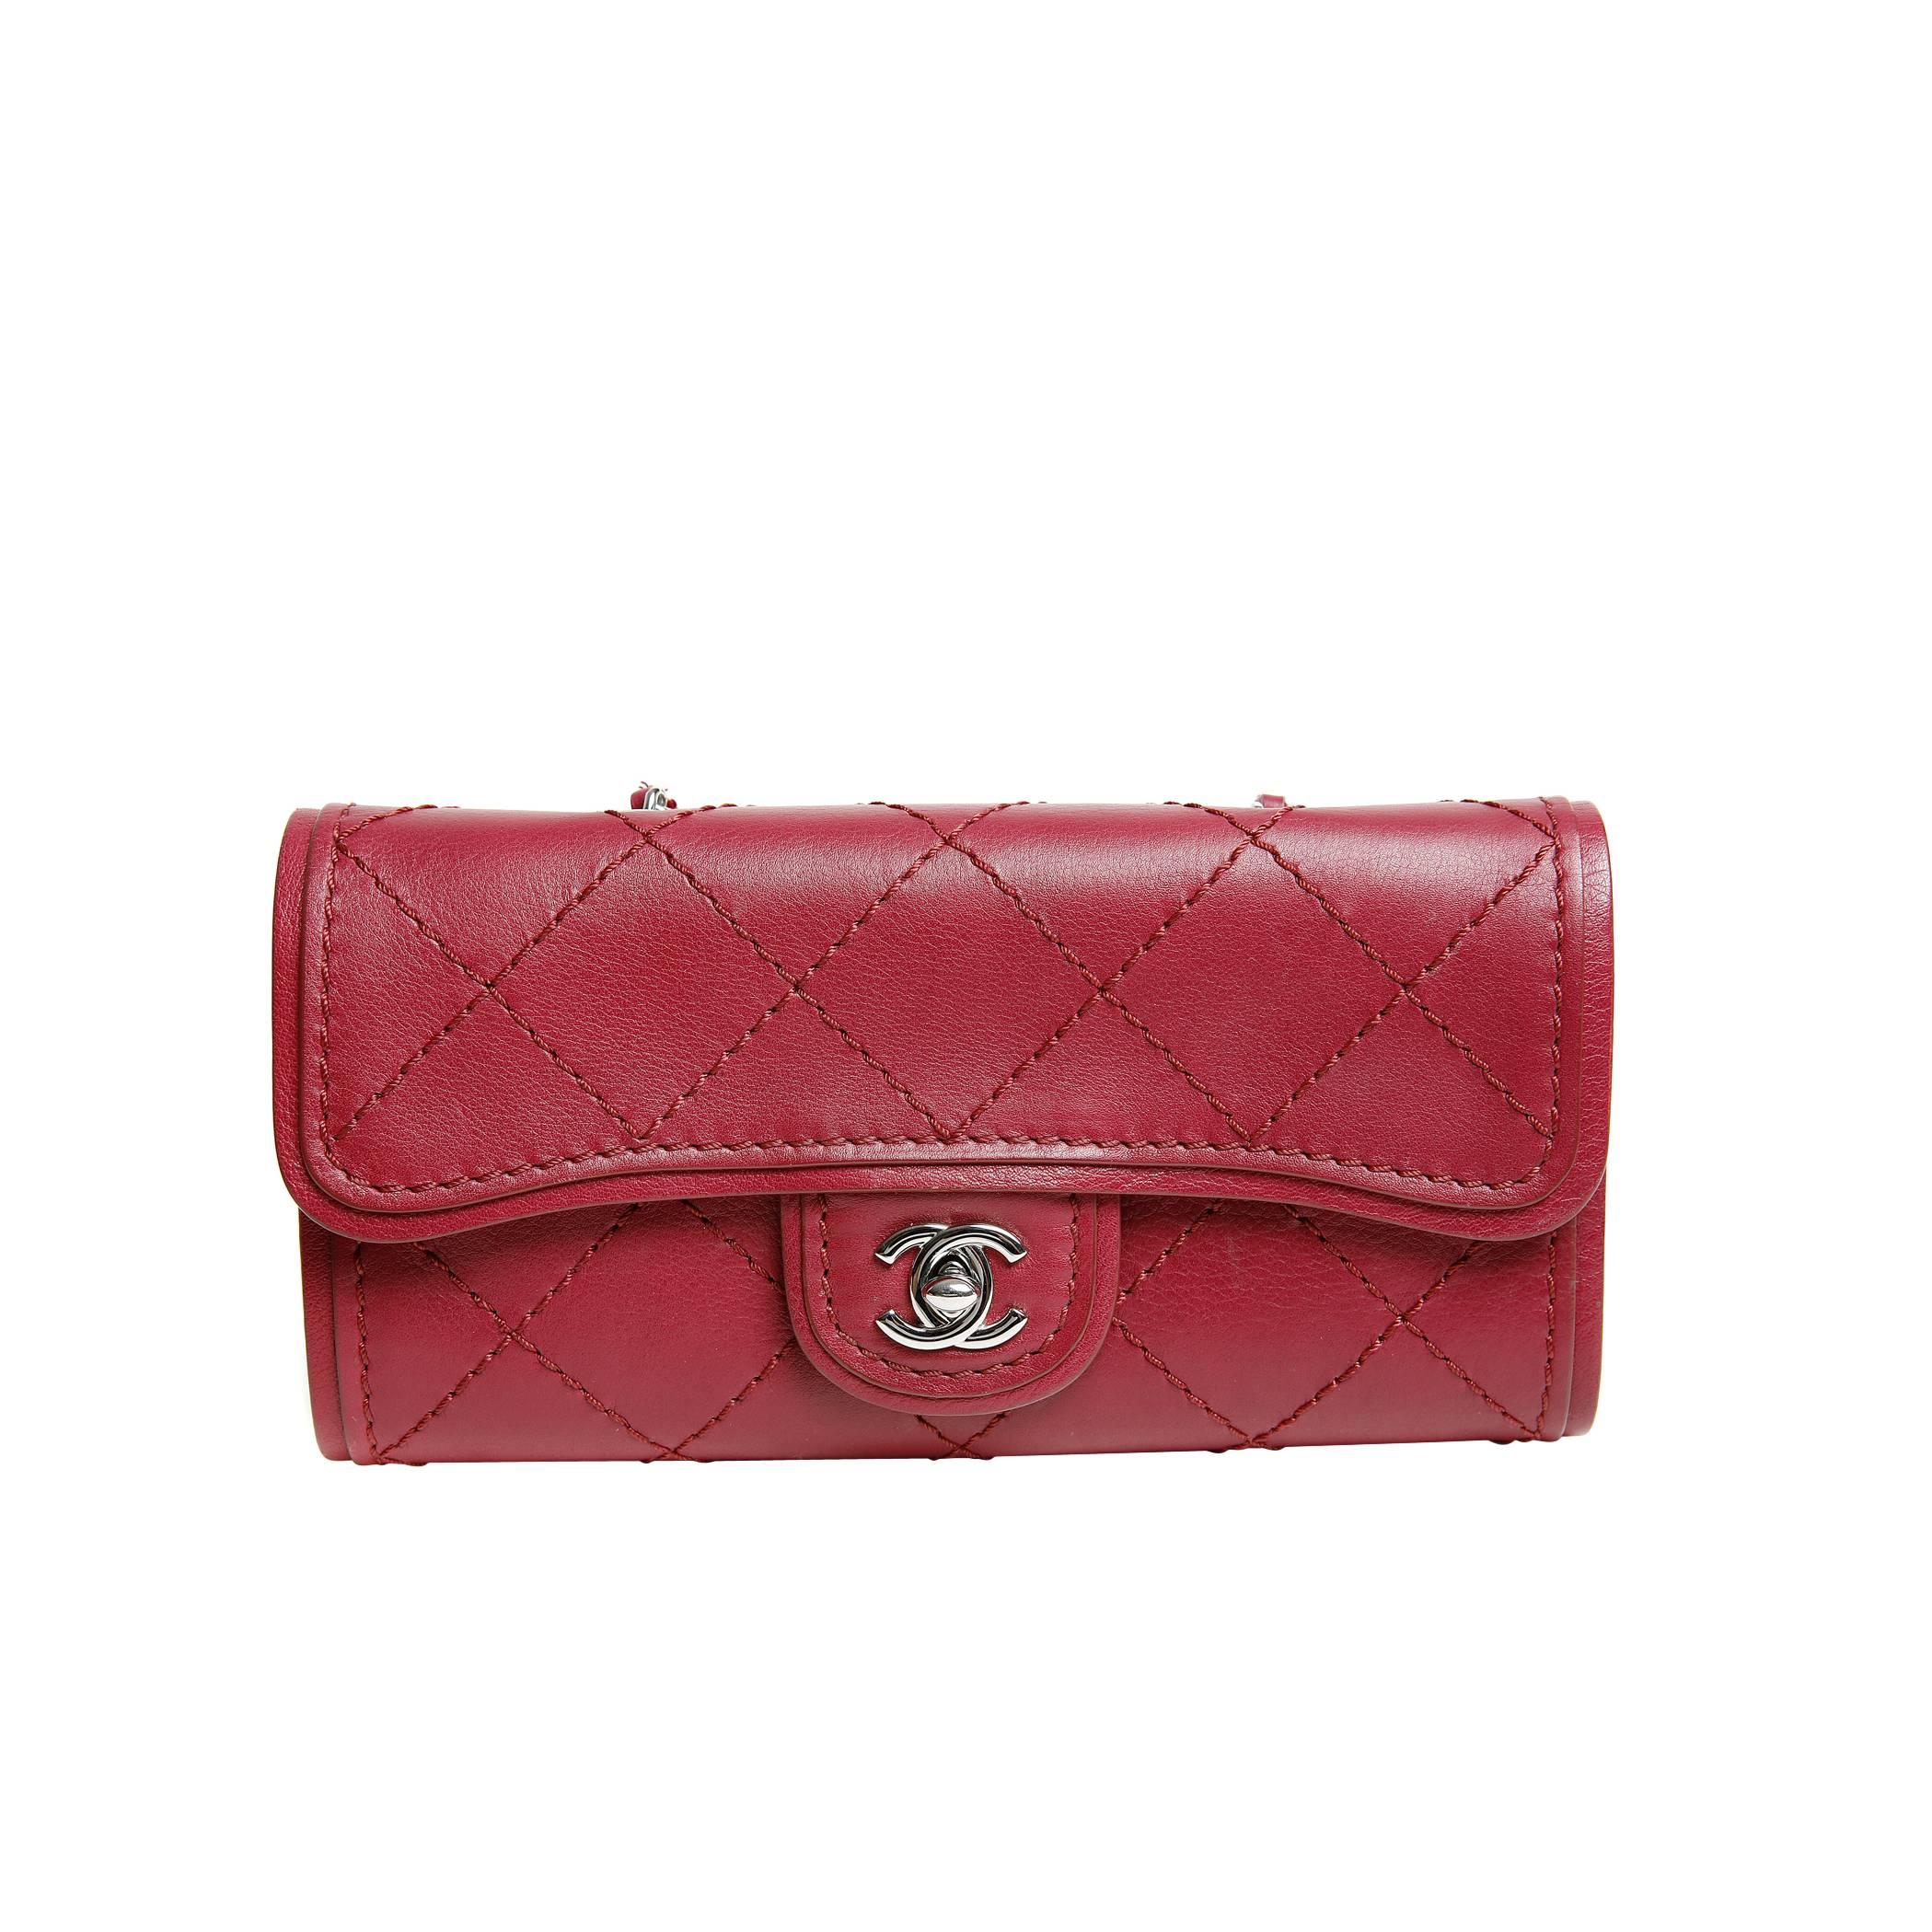 Chanel Red Leather Cross Body Wallet Bag For Sale